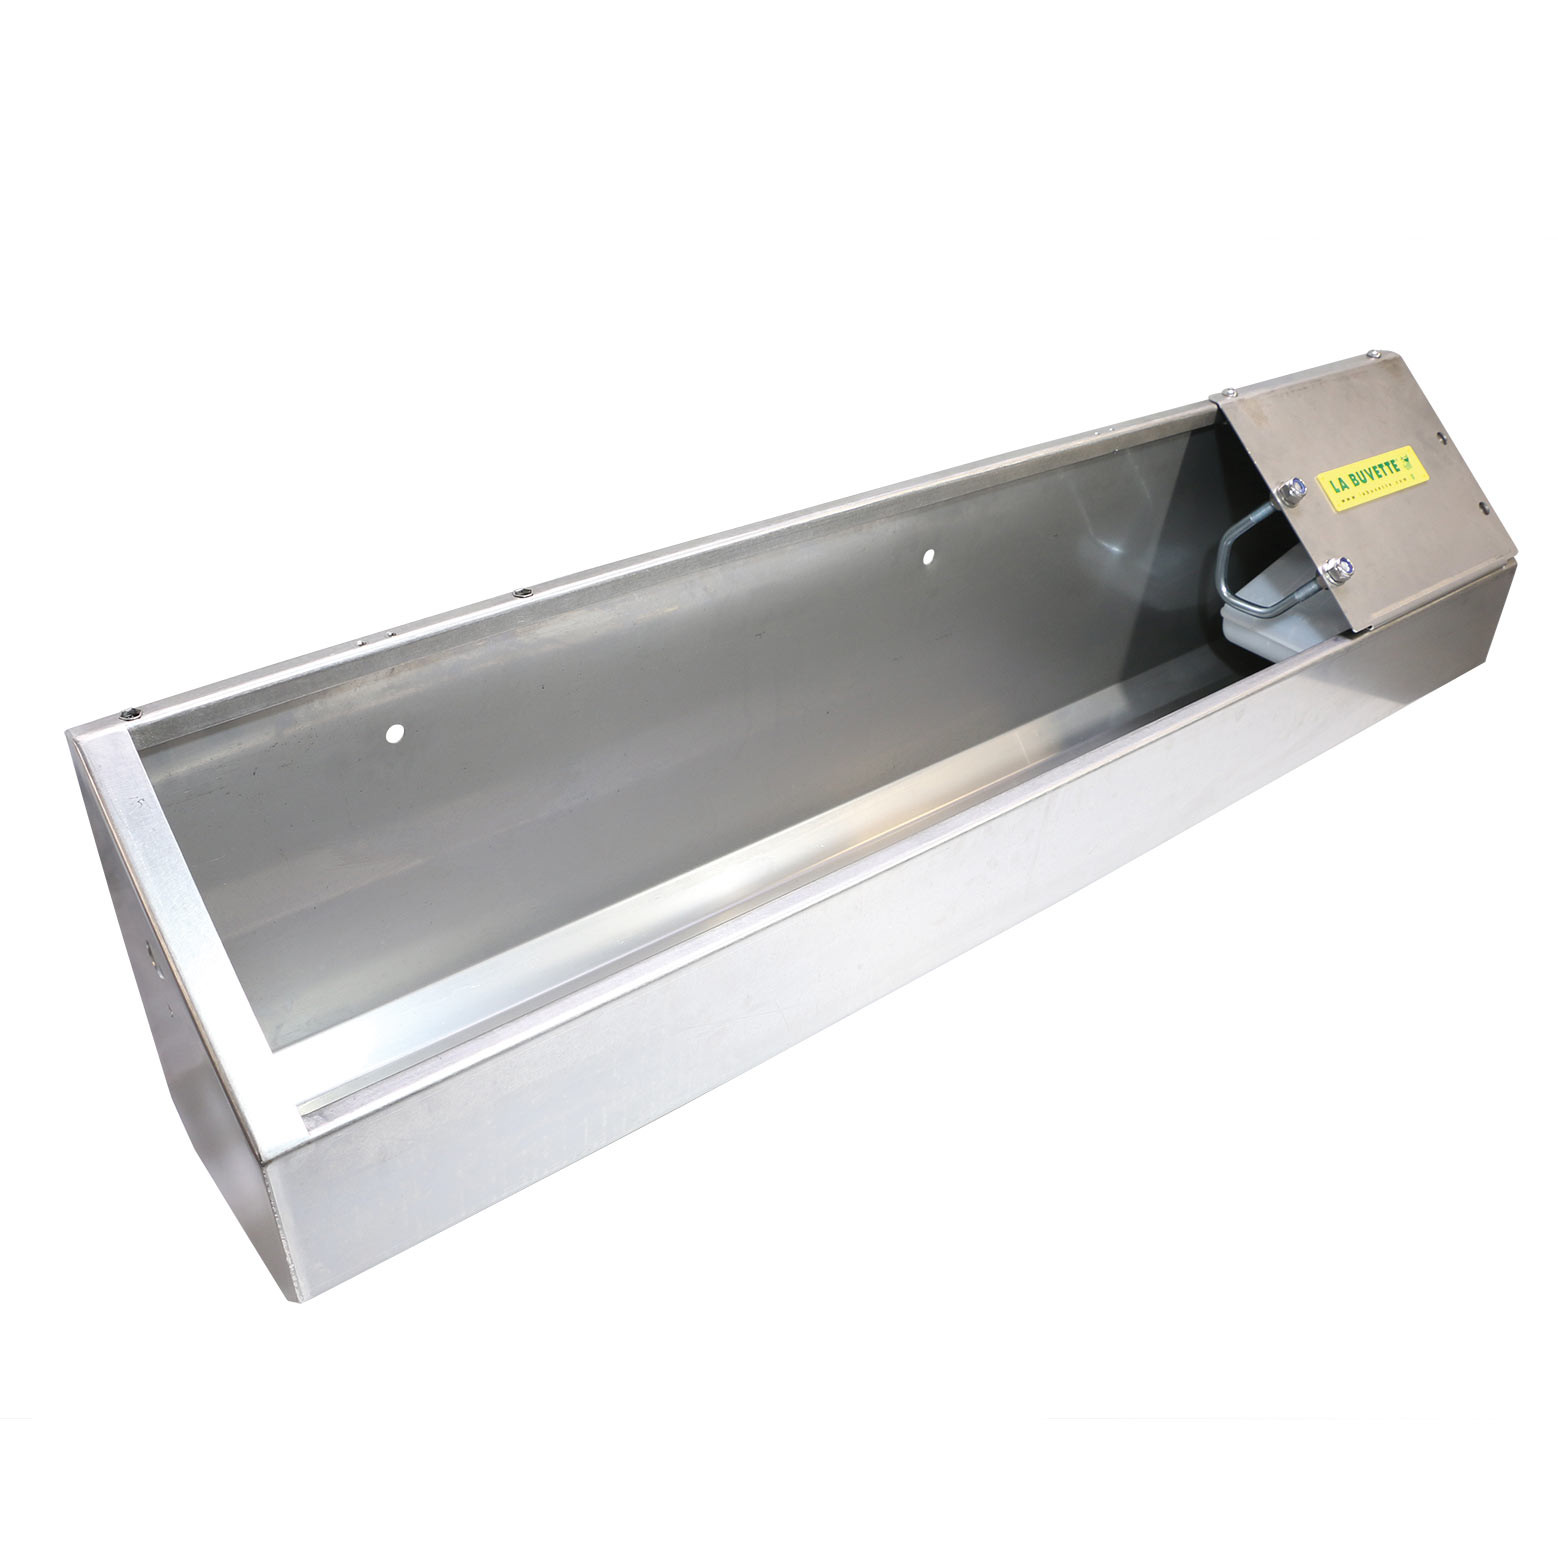 OVICAP INOX 120 stainless steel TROUGH